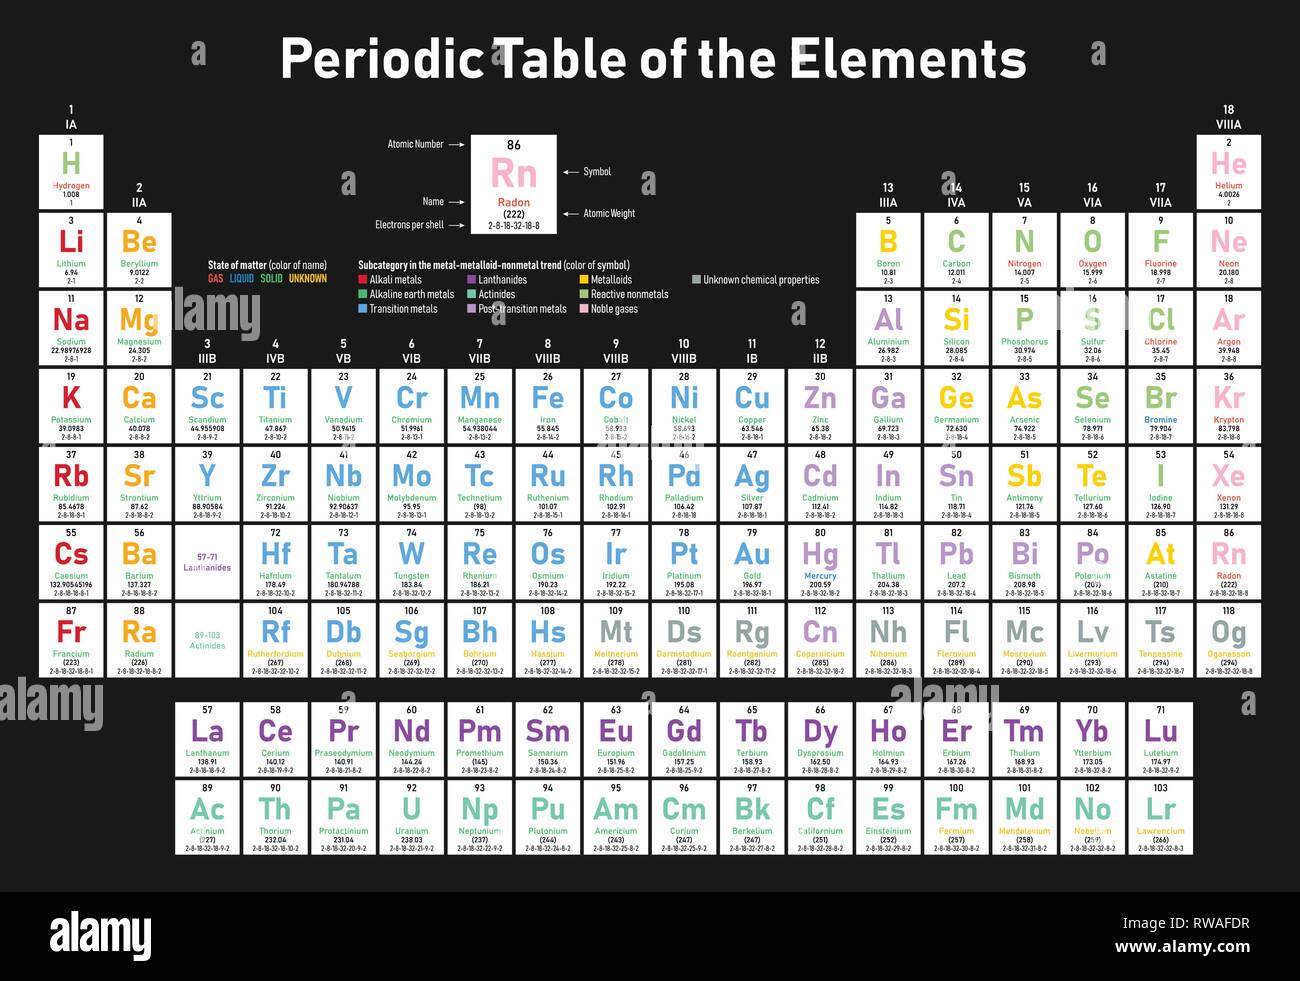 Colorful Periodic Table Of The Elements Shows Atomic Number